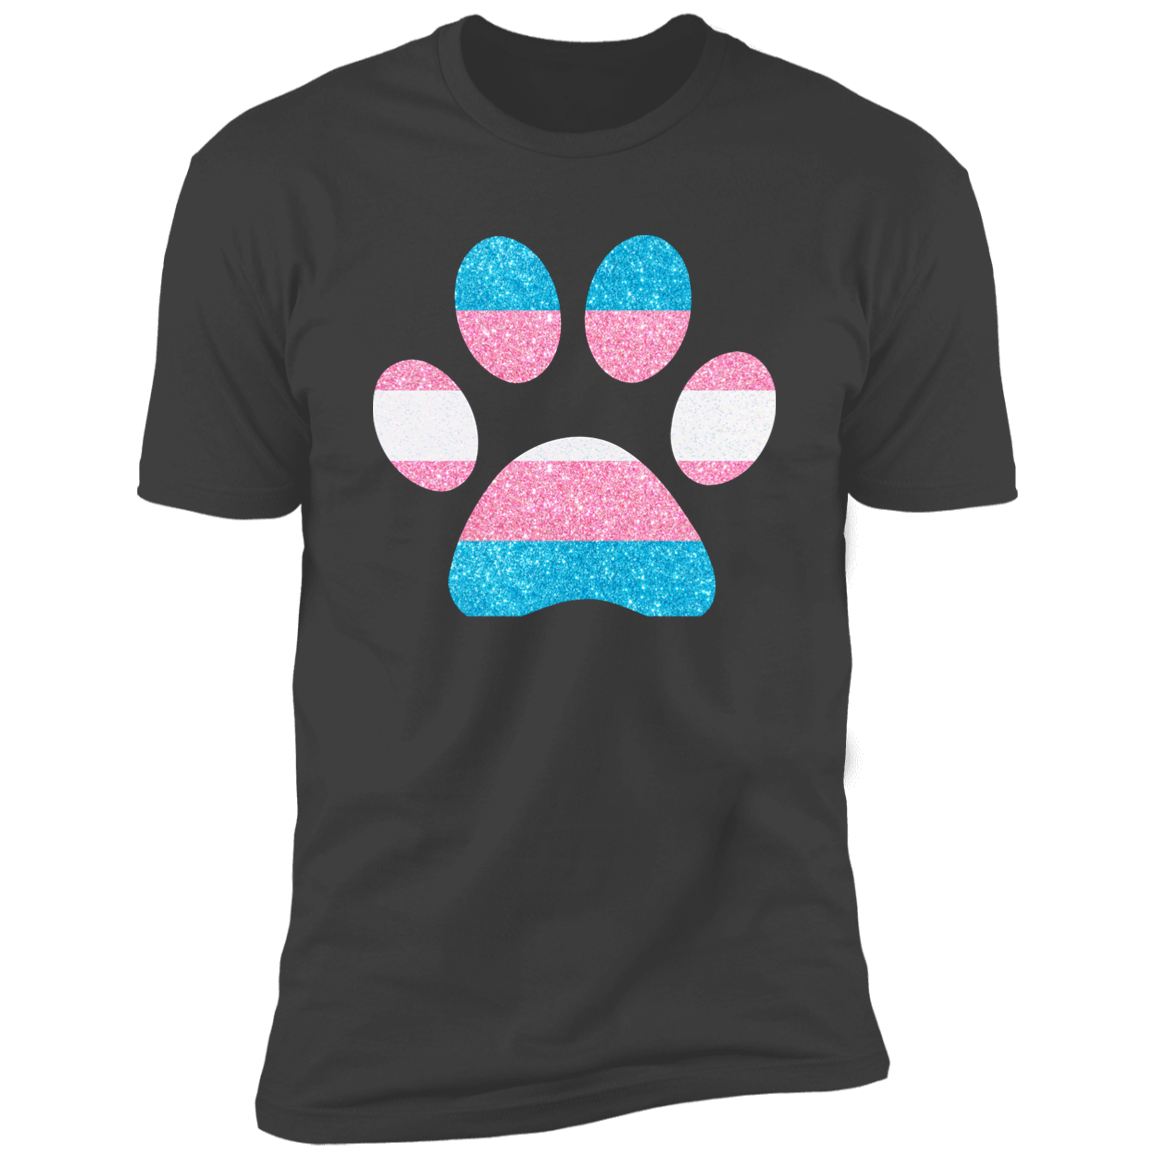 Dog Paw Trans Pride t-shirt, dog trans pride dog shirt for humans, in heavy metal gray